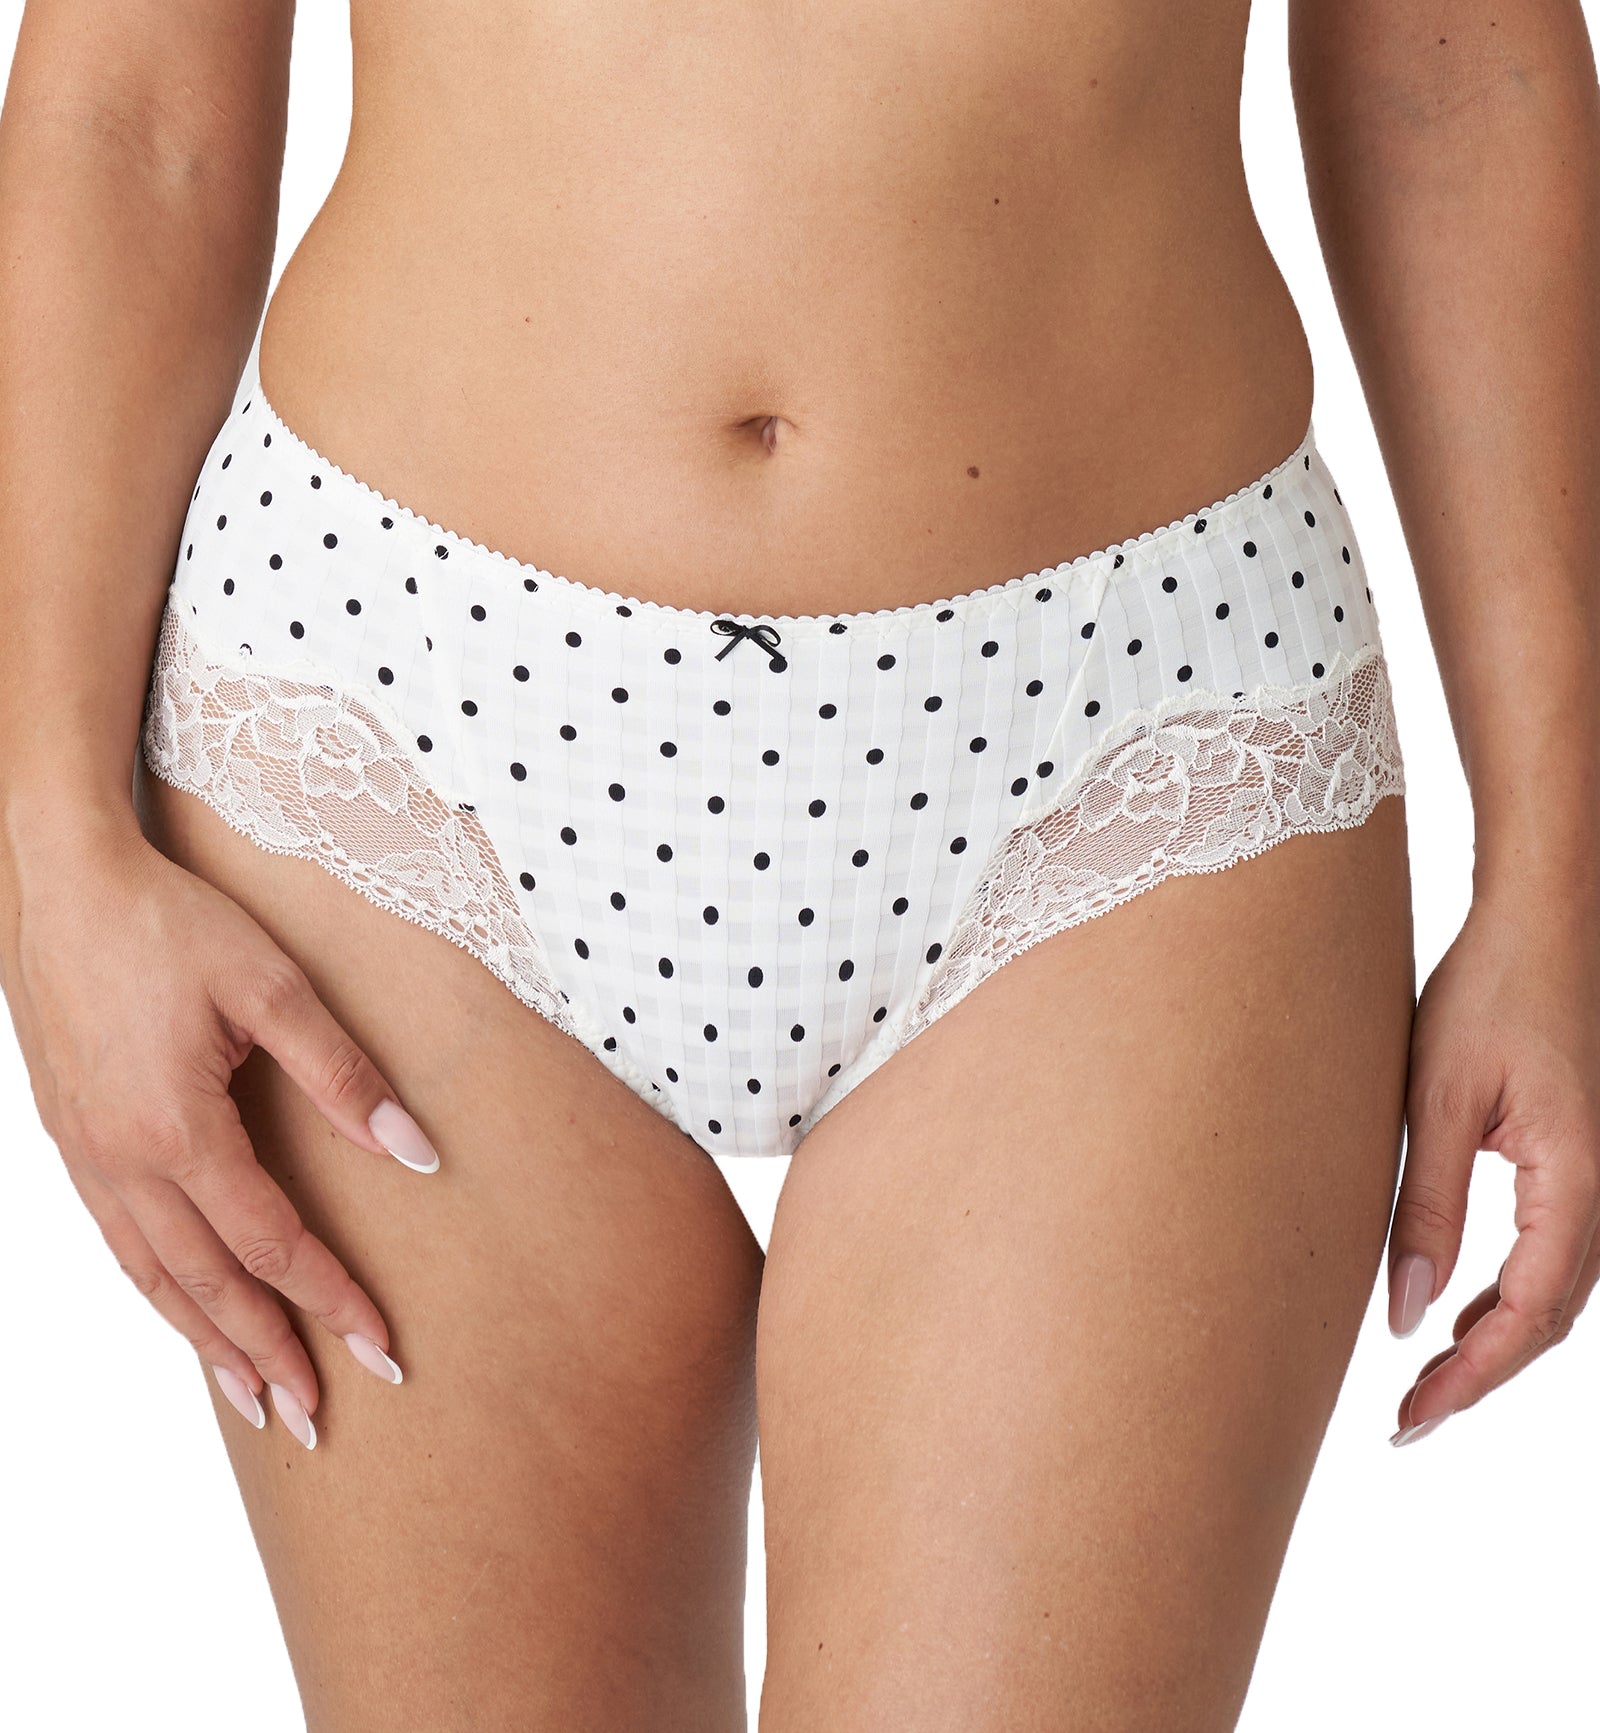 PrimaDonna Madison Matching Hotpants Panty (0562127),XS,Coco Classic - Coco Classic,XS